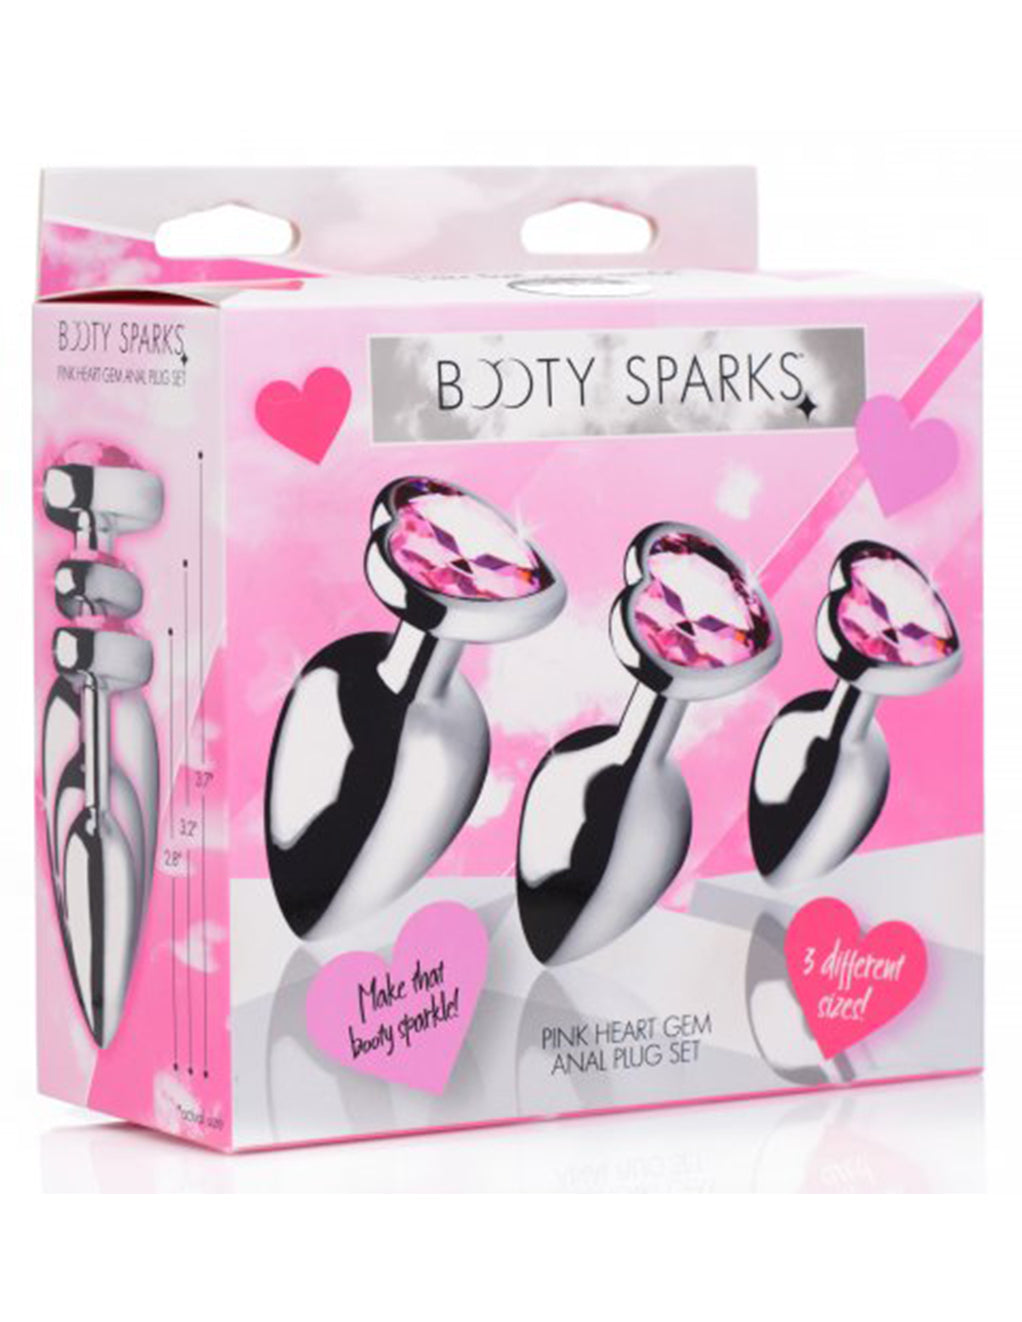 Booty Sparks Pink Heart Plug Set- Package